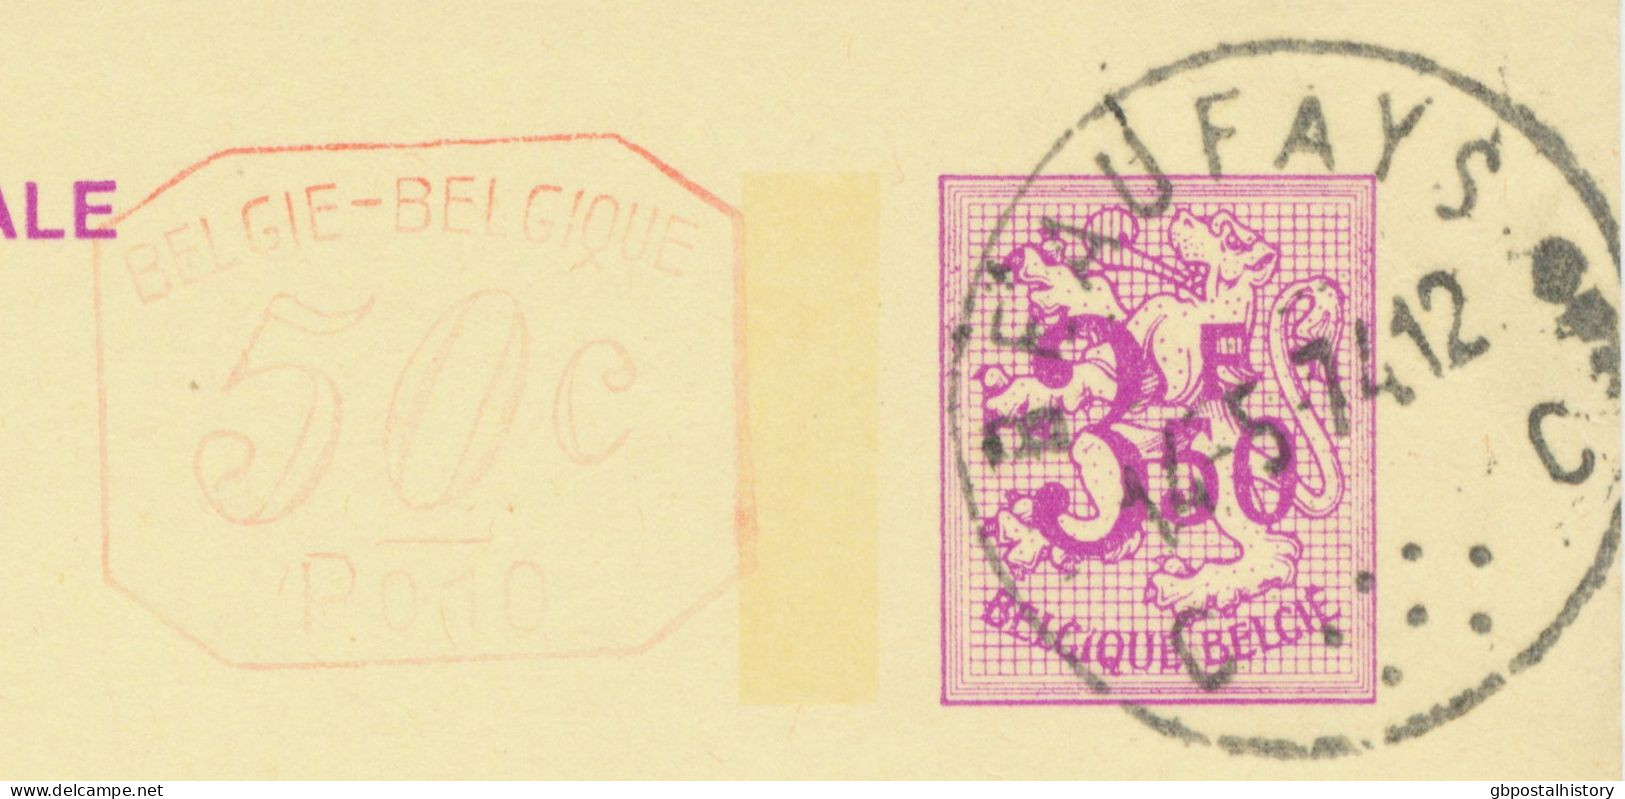 BELGIUM VILLAGE POSTMARKS  BEAUFAYS C (now Chaudfontaine) SC With Dots 1974 (Postal Stationery 3,50 + 0,50 F, PUBLIBEL 2 - Punktstempel